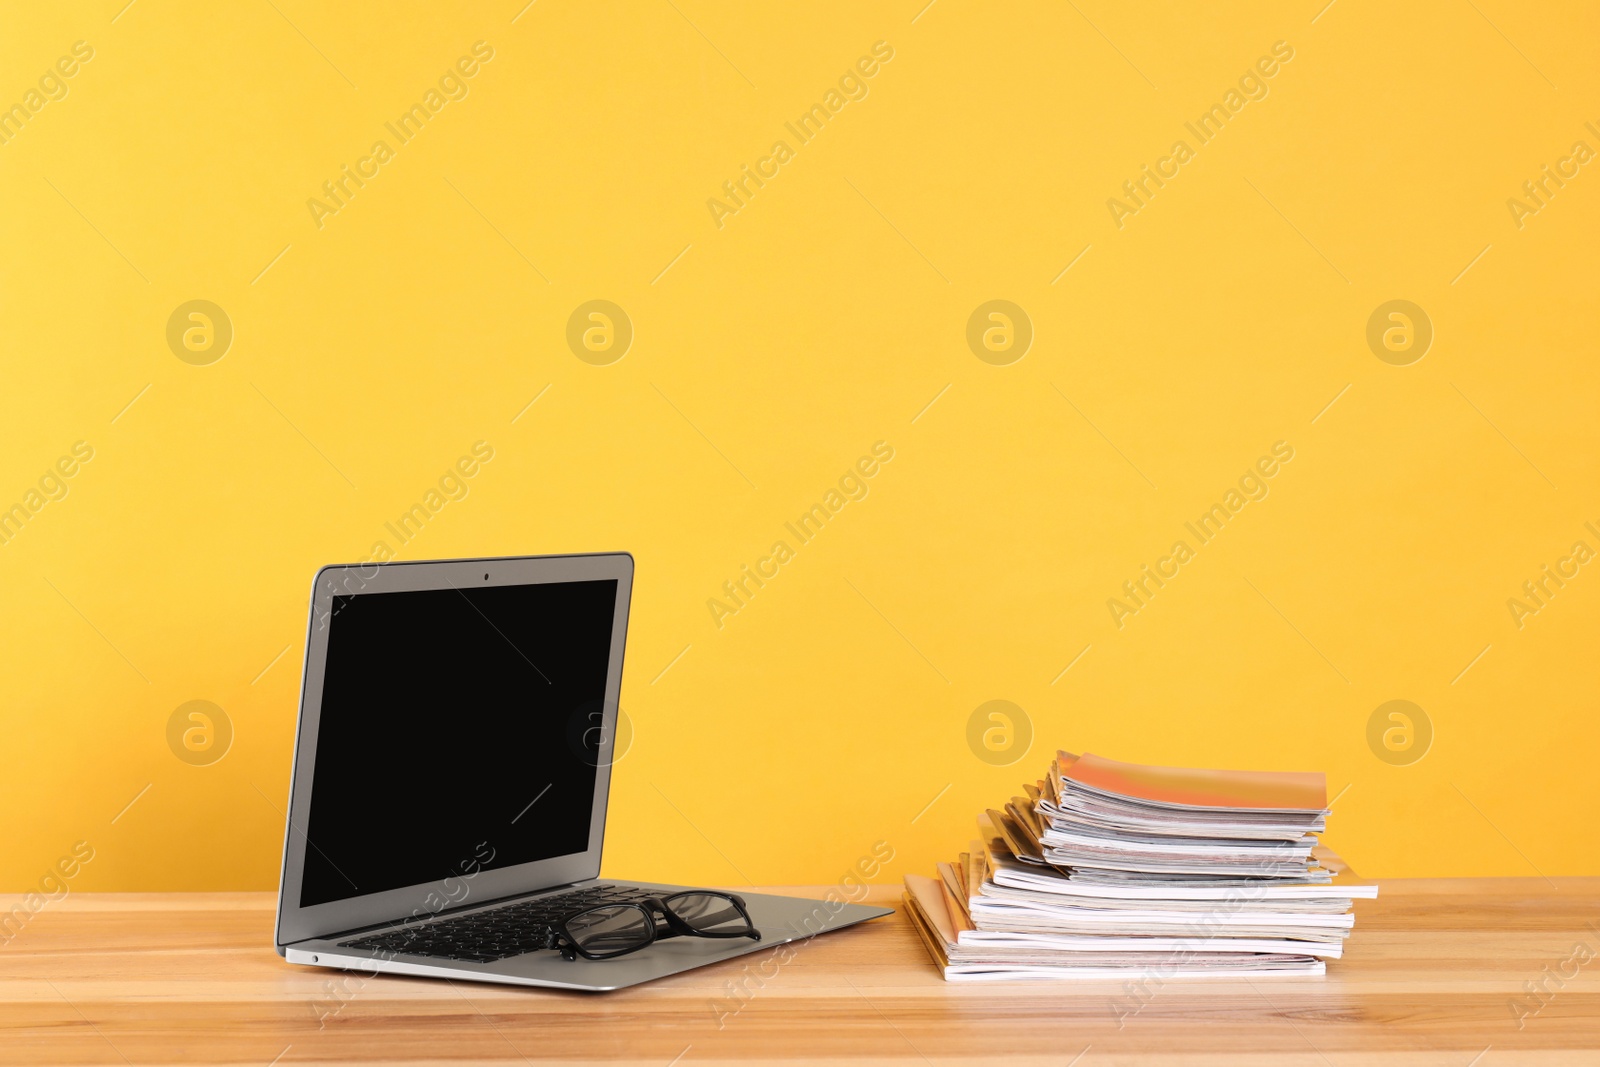 Photo of Laptop, glasses and stack of magazines on wooden table. Space for text